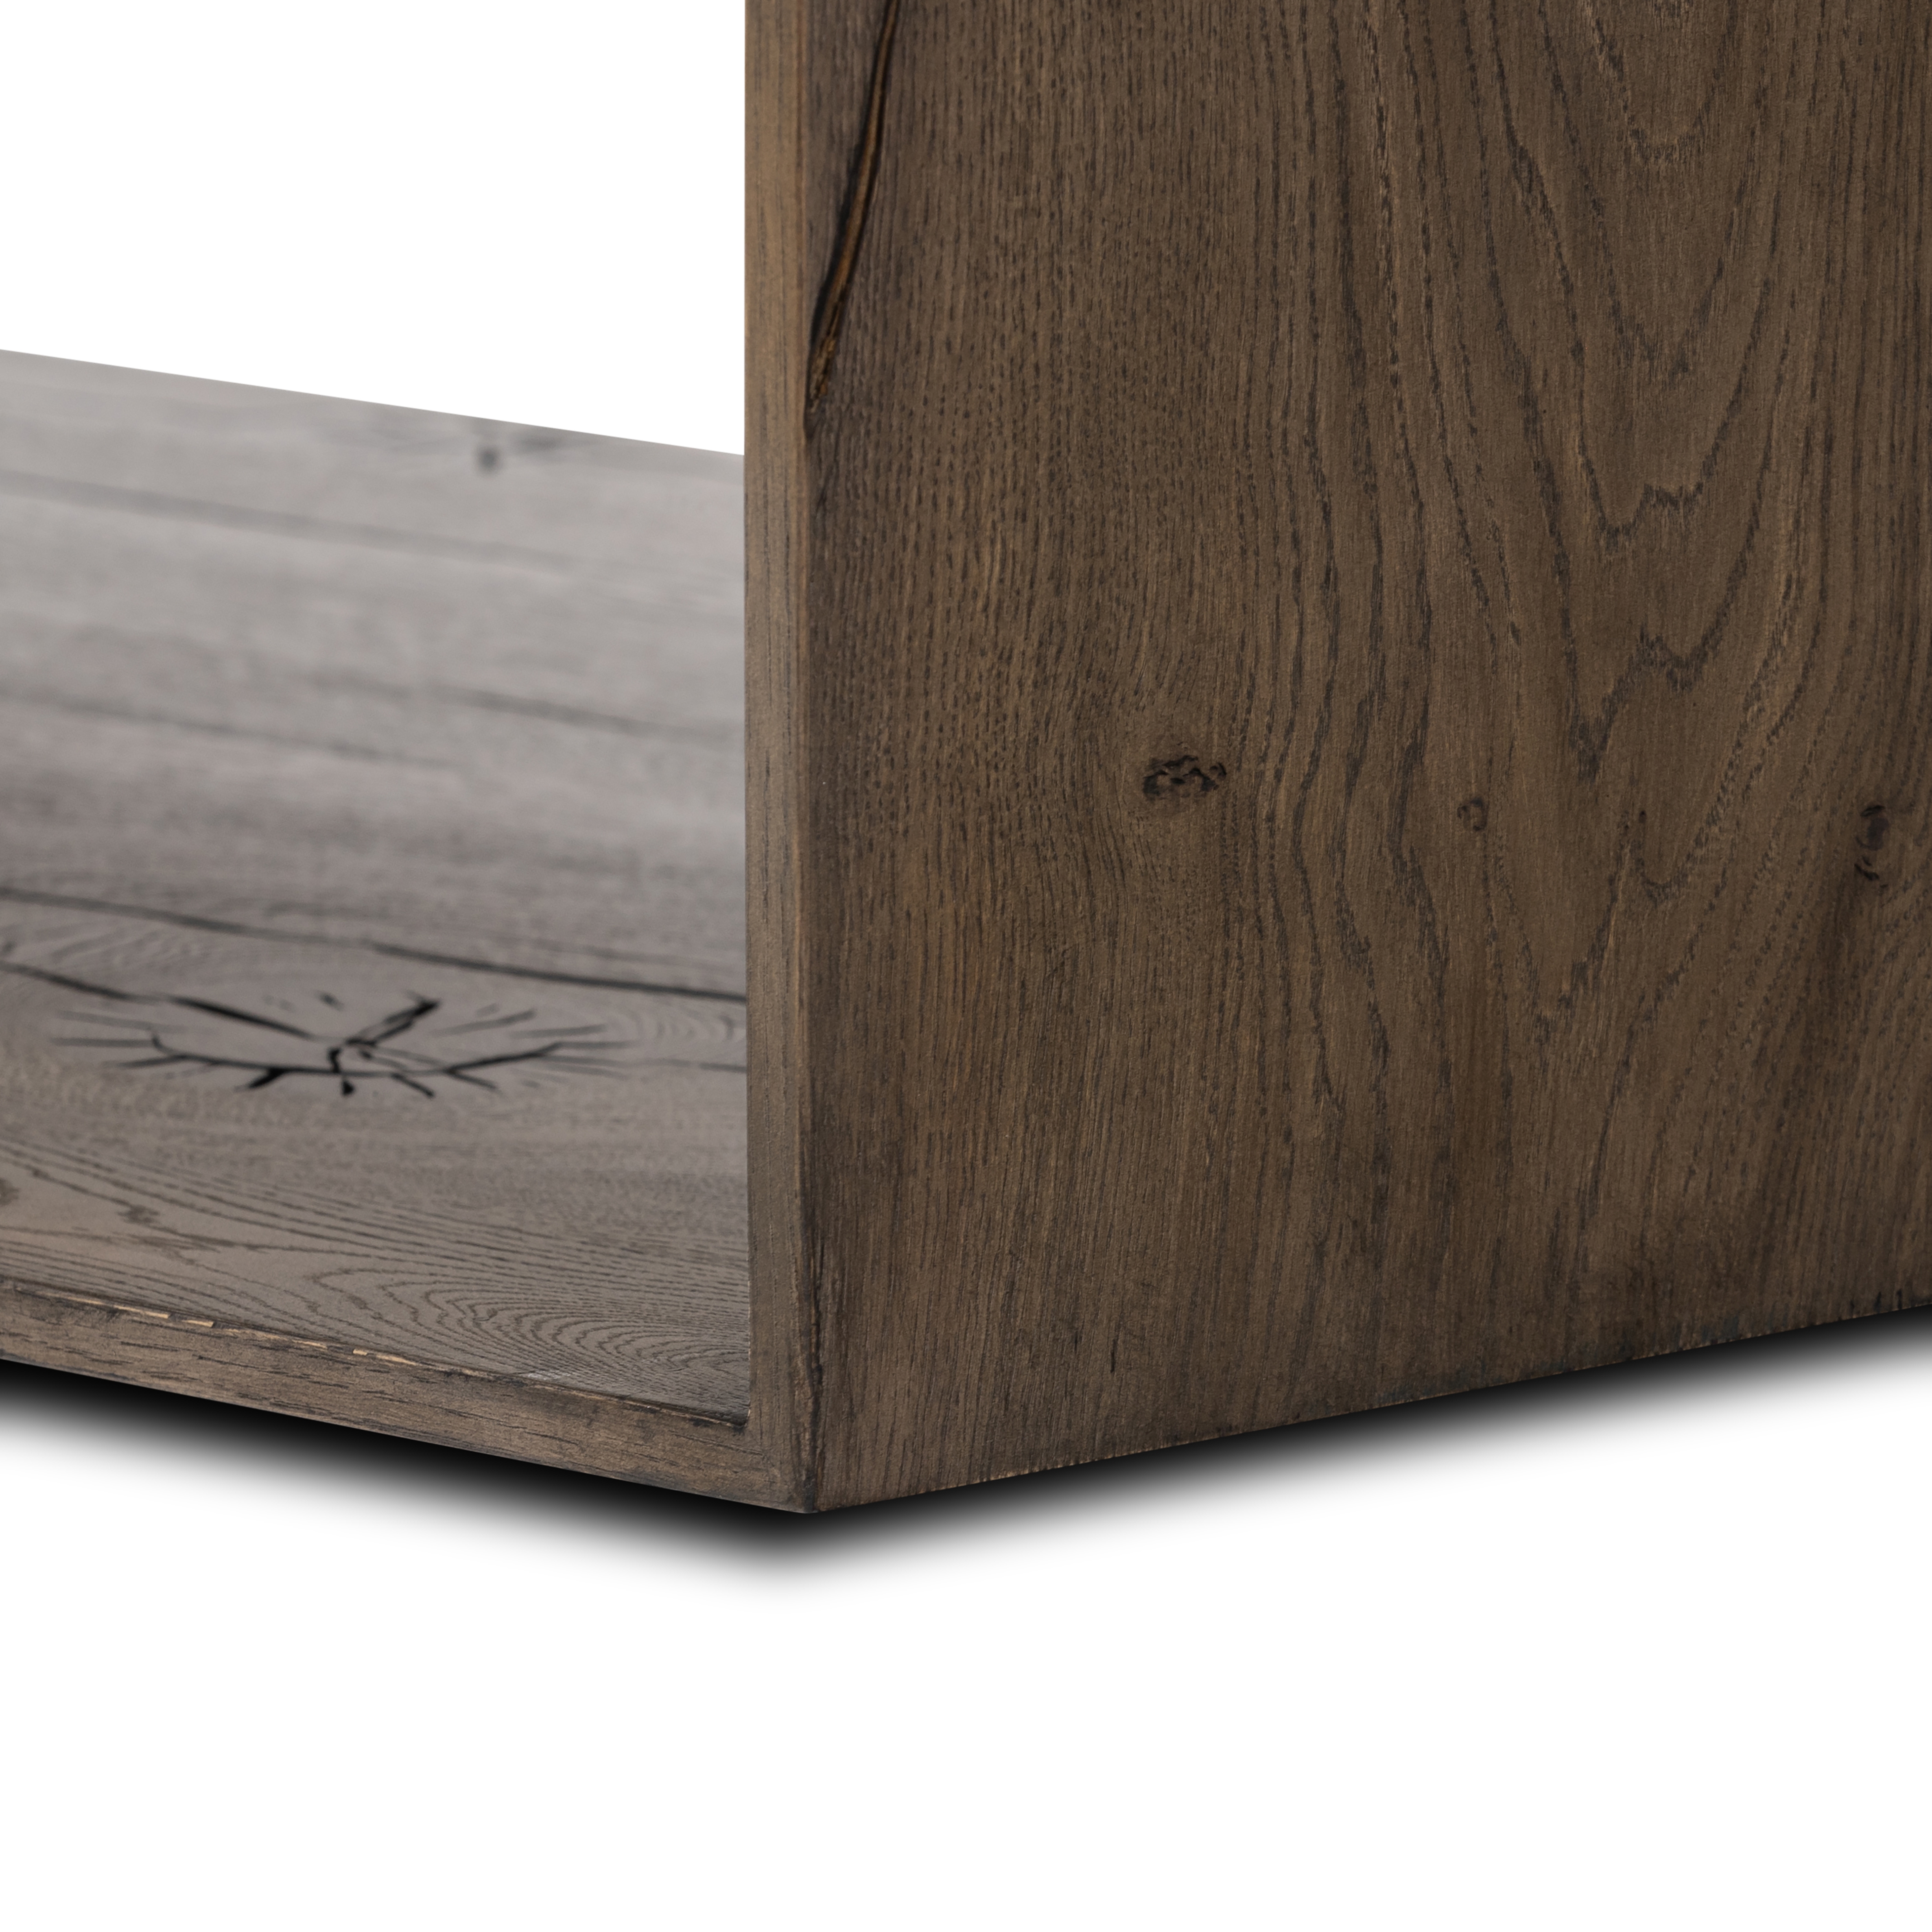 Odell Coffee Table-Grey Rclmd French Oak - Image 6